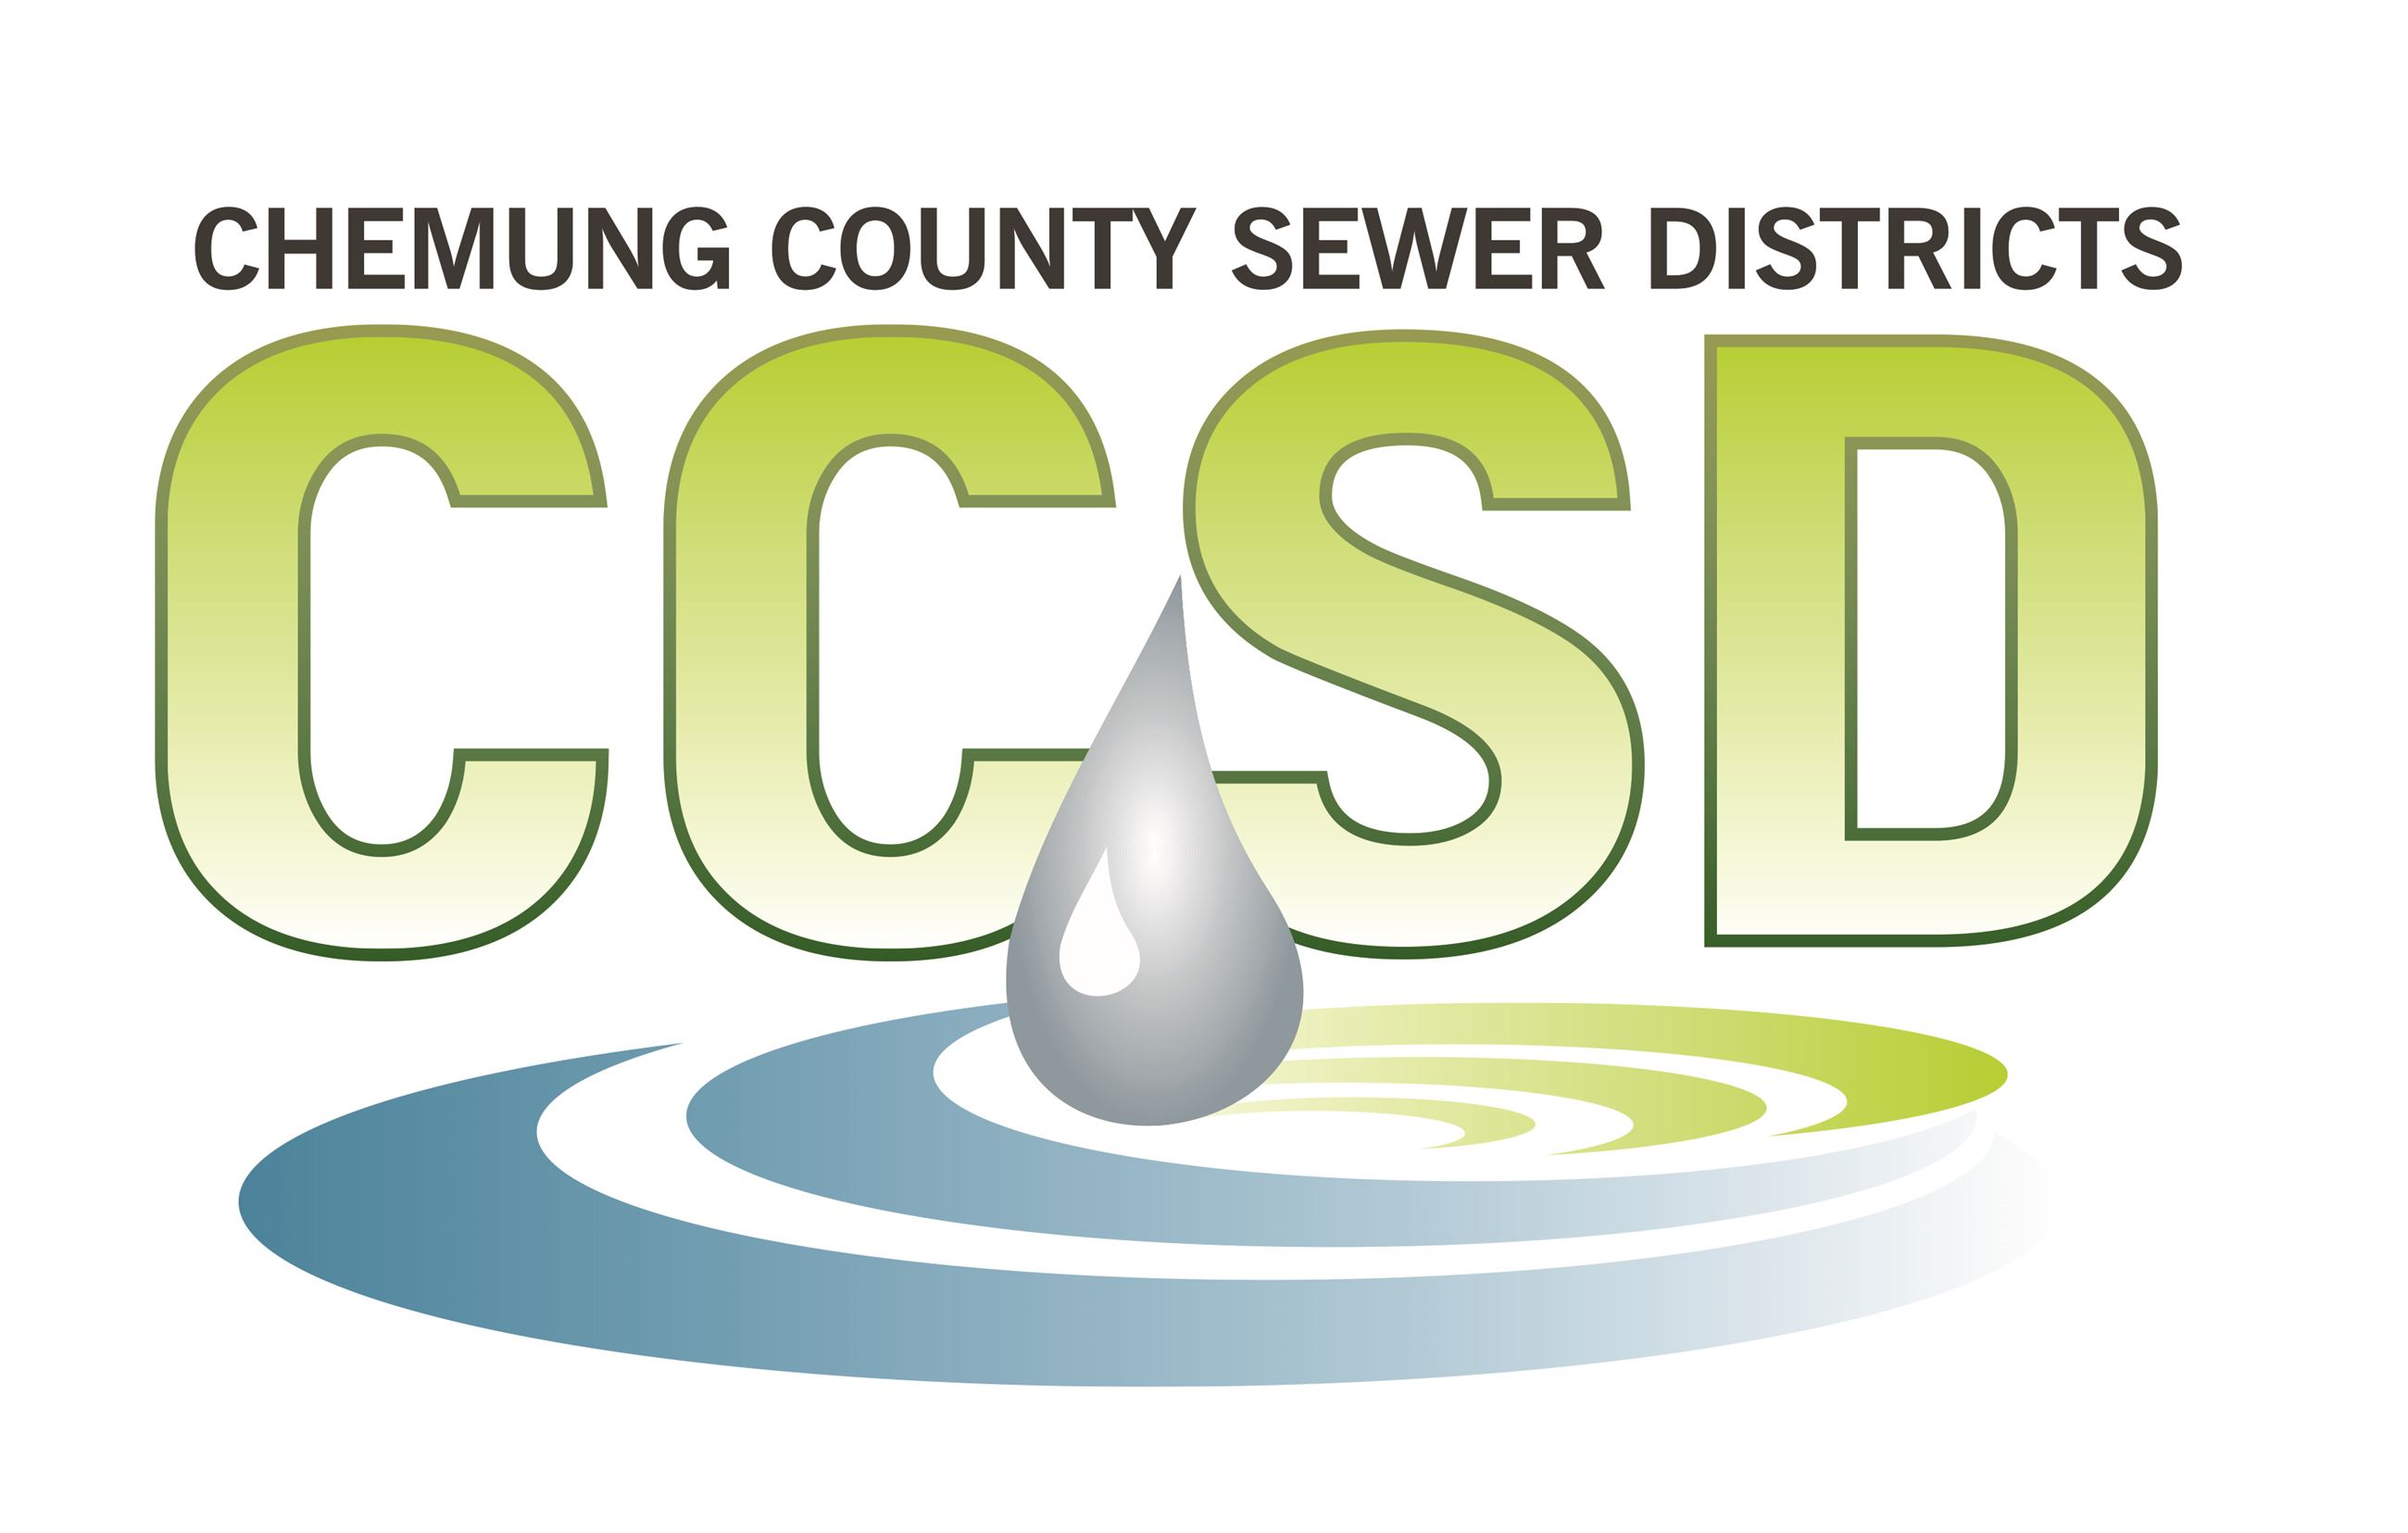 Image of Chemung County Sewer District